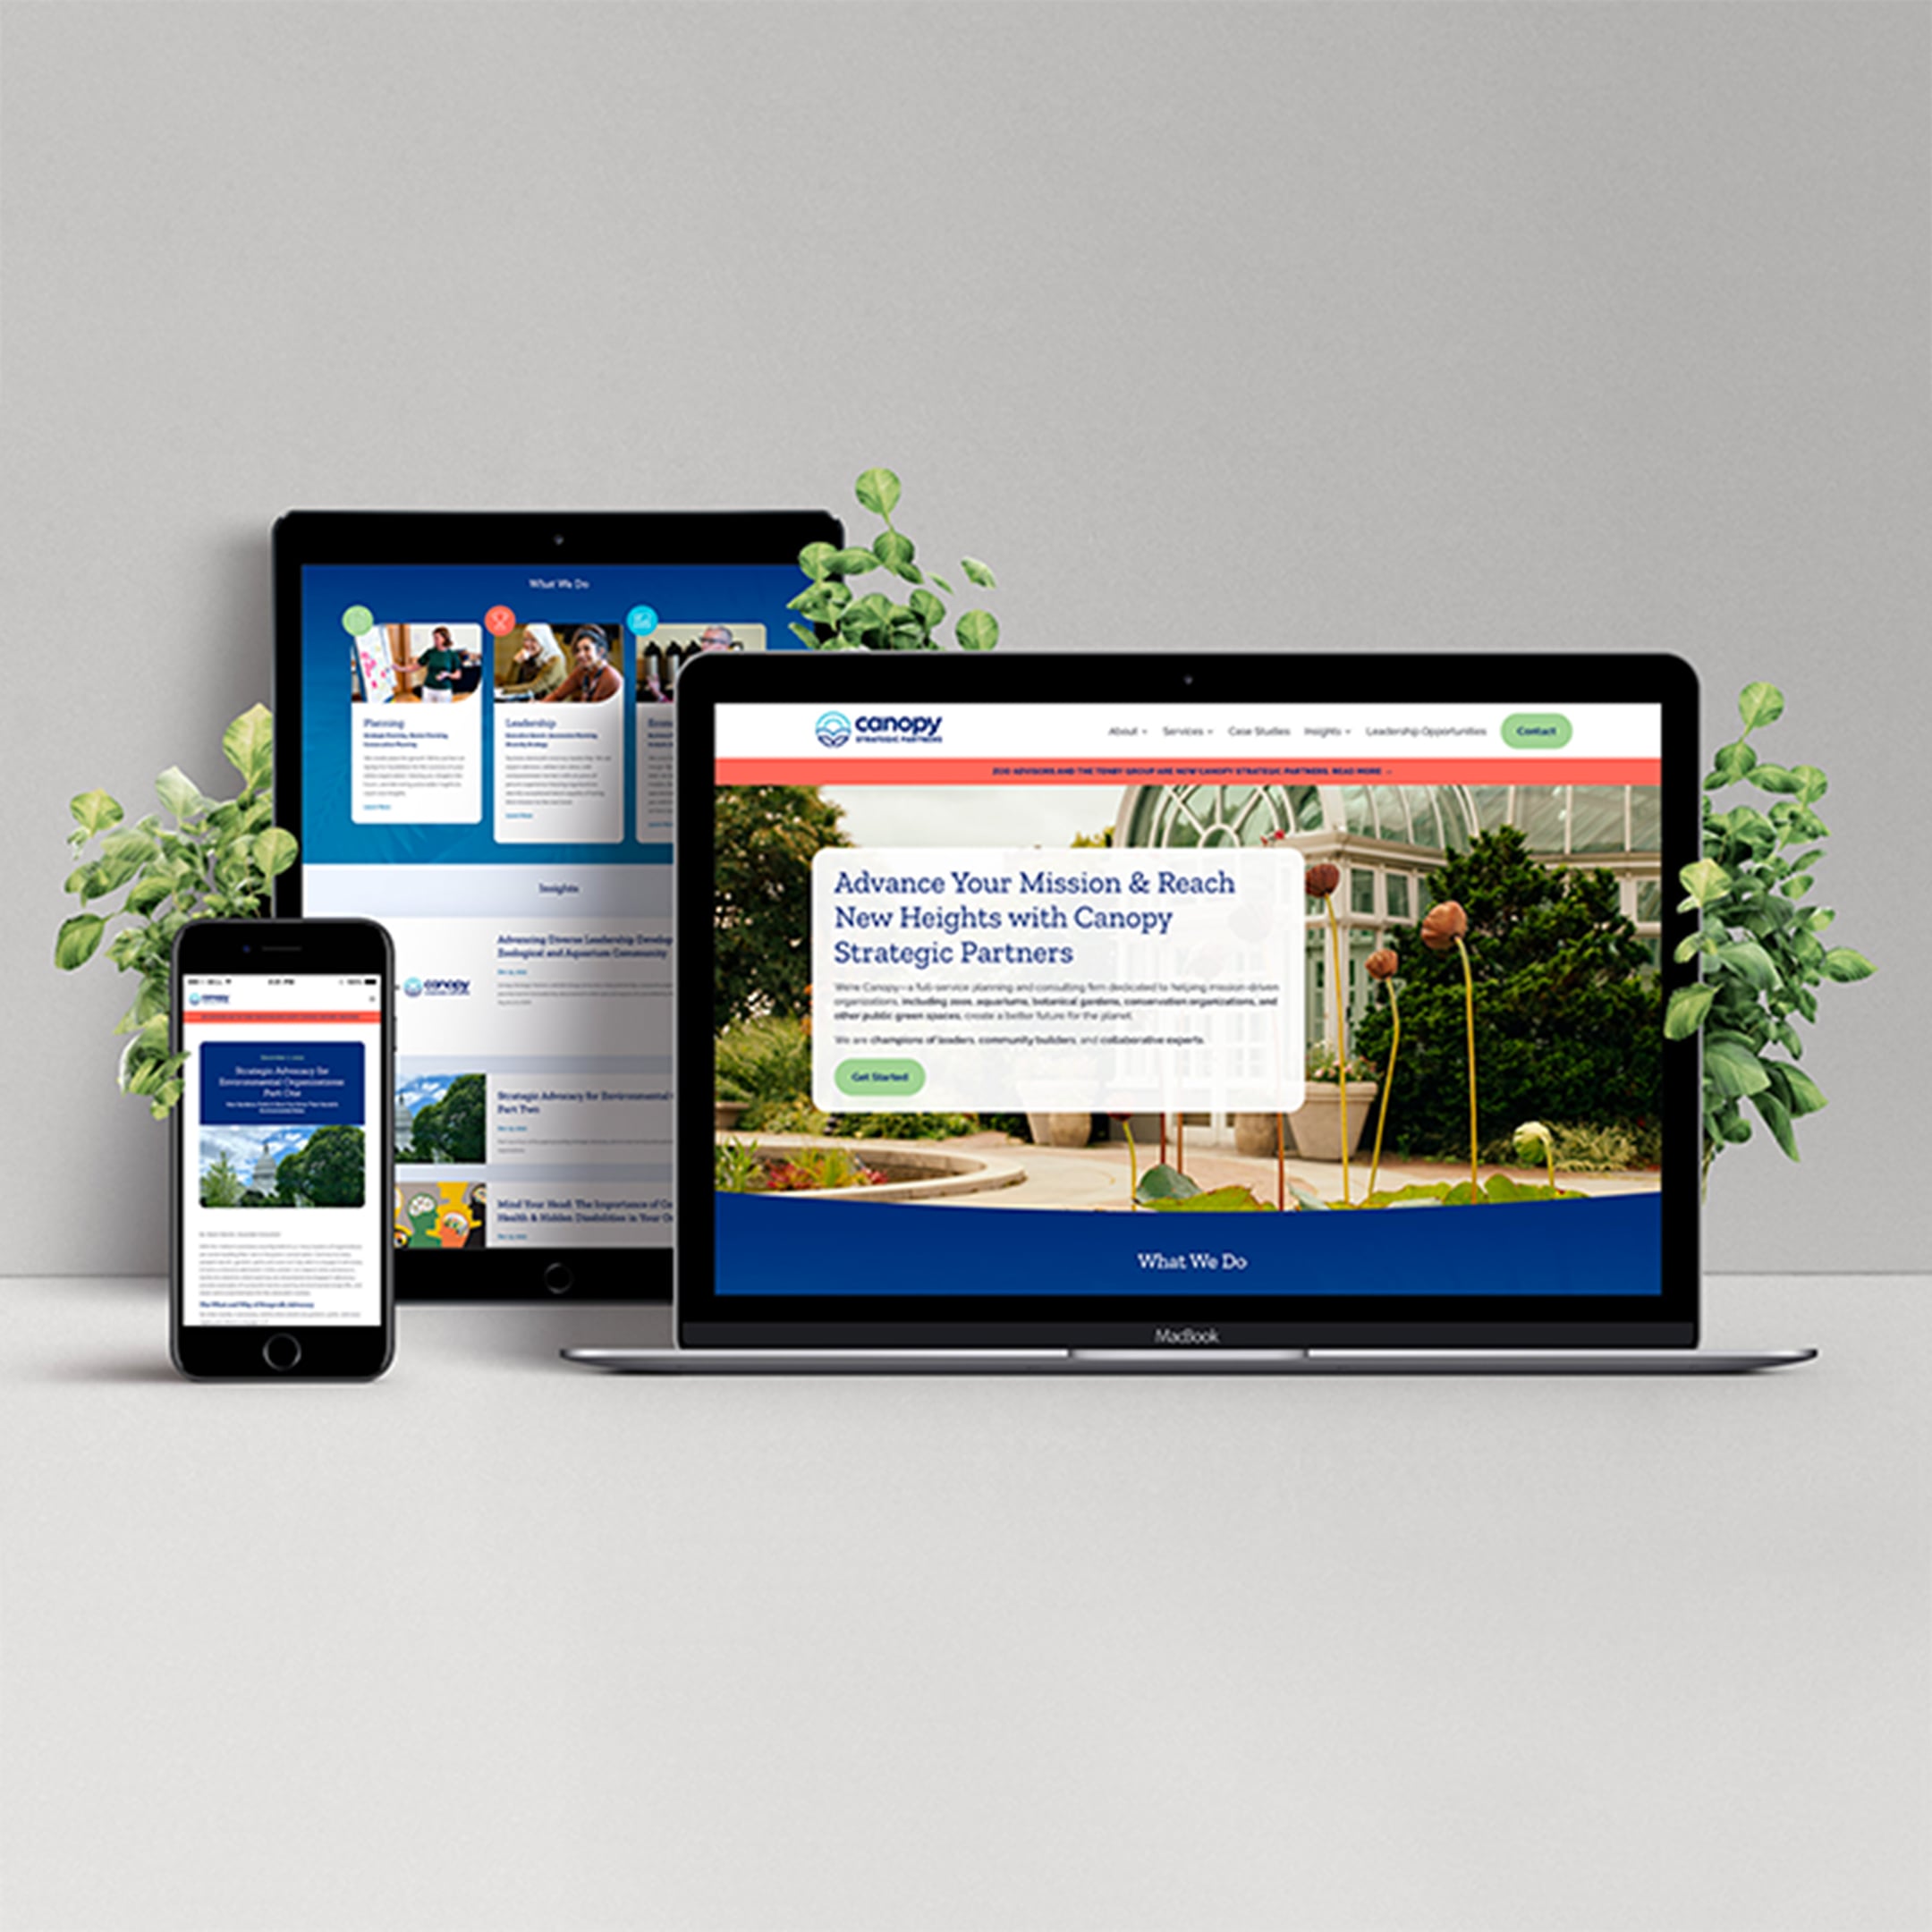 Canopy Strategic Partners Website redesign shown on 3 different devices over a gray background with leaves